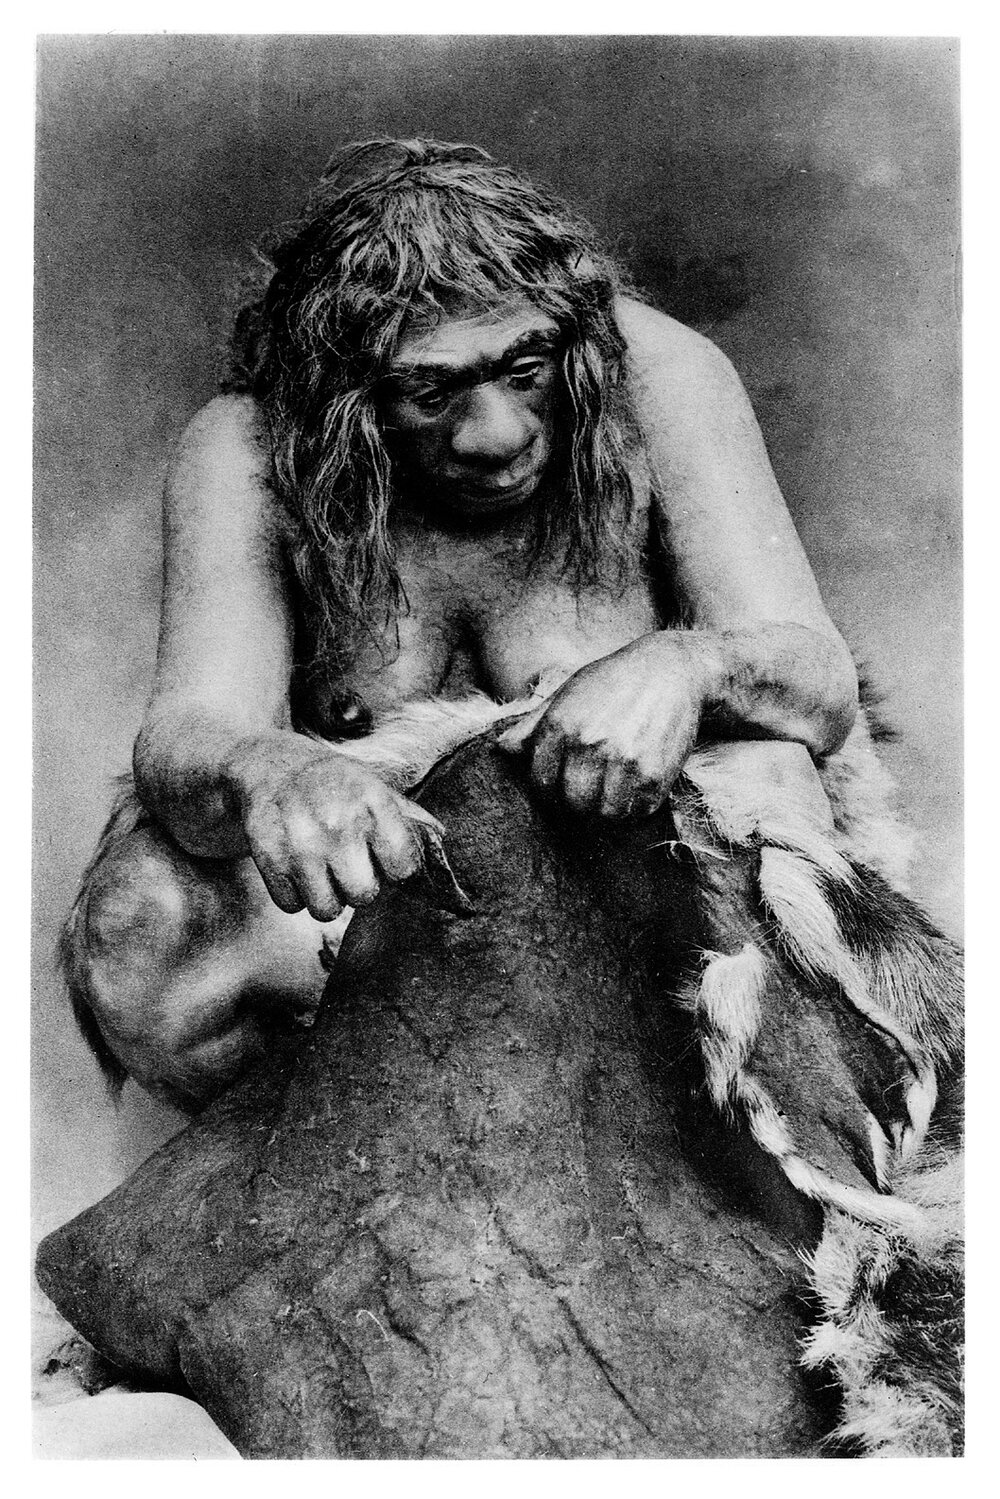 Restoration of a Neanderthal woman cleaning a reindeer skin